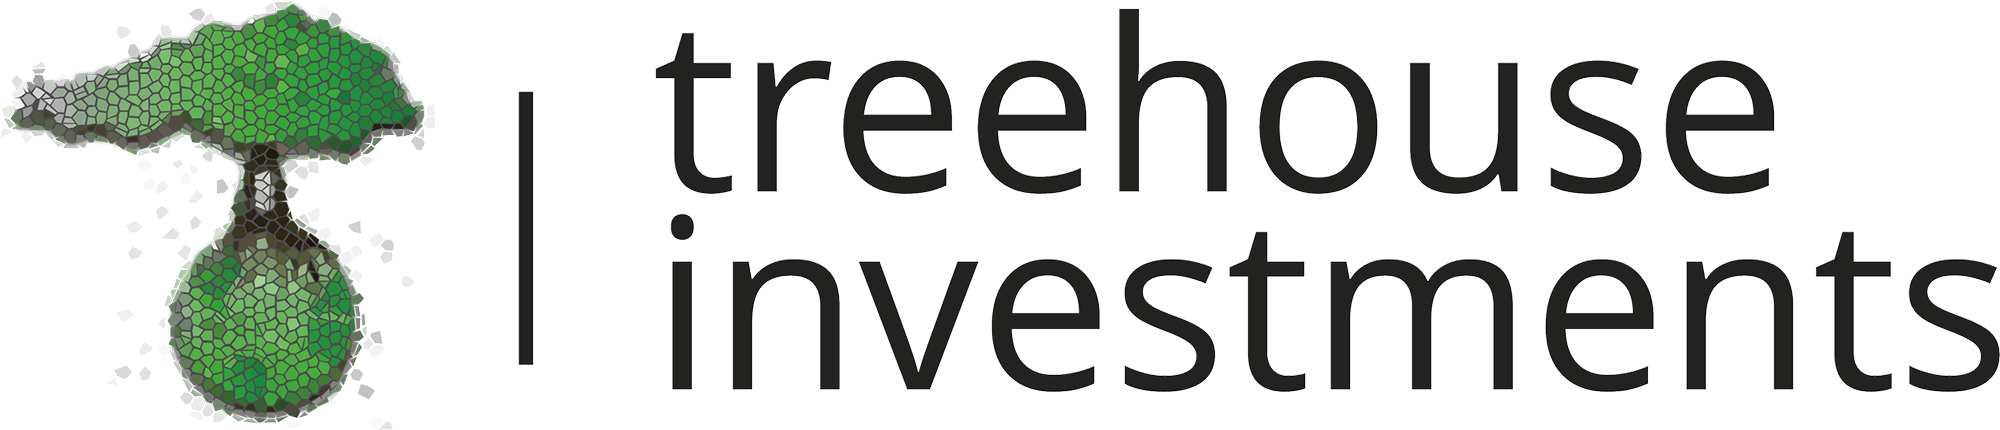 Treehouse Investments – Equity